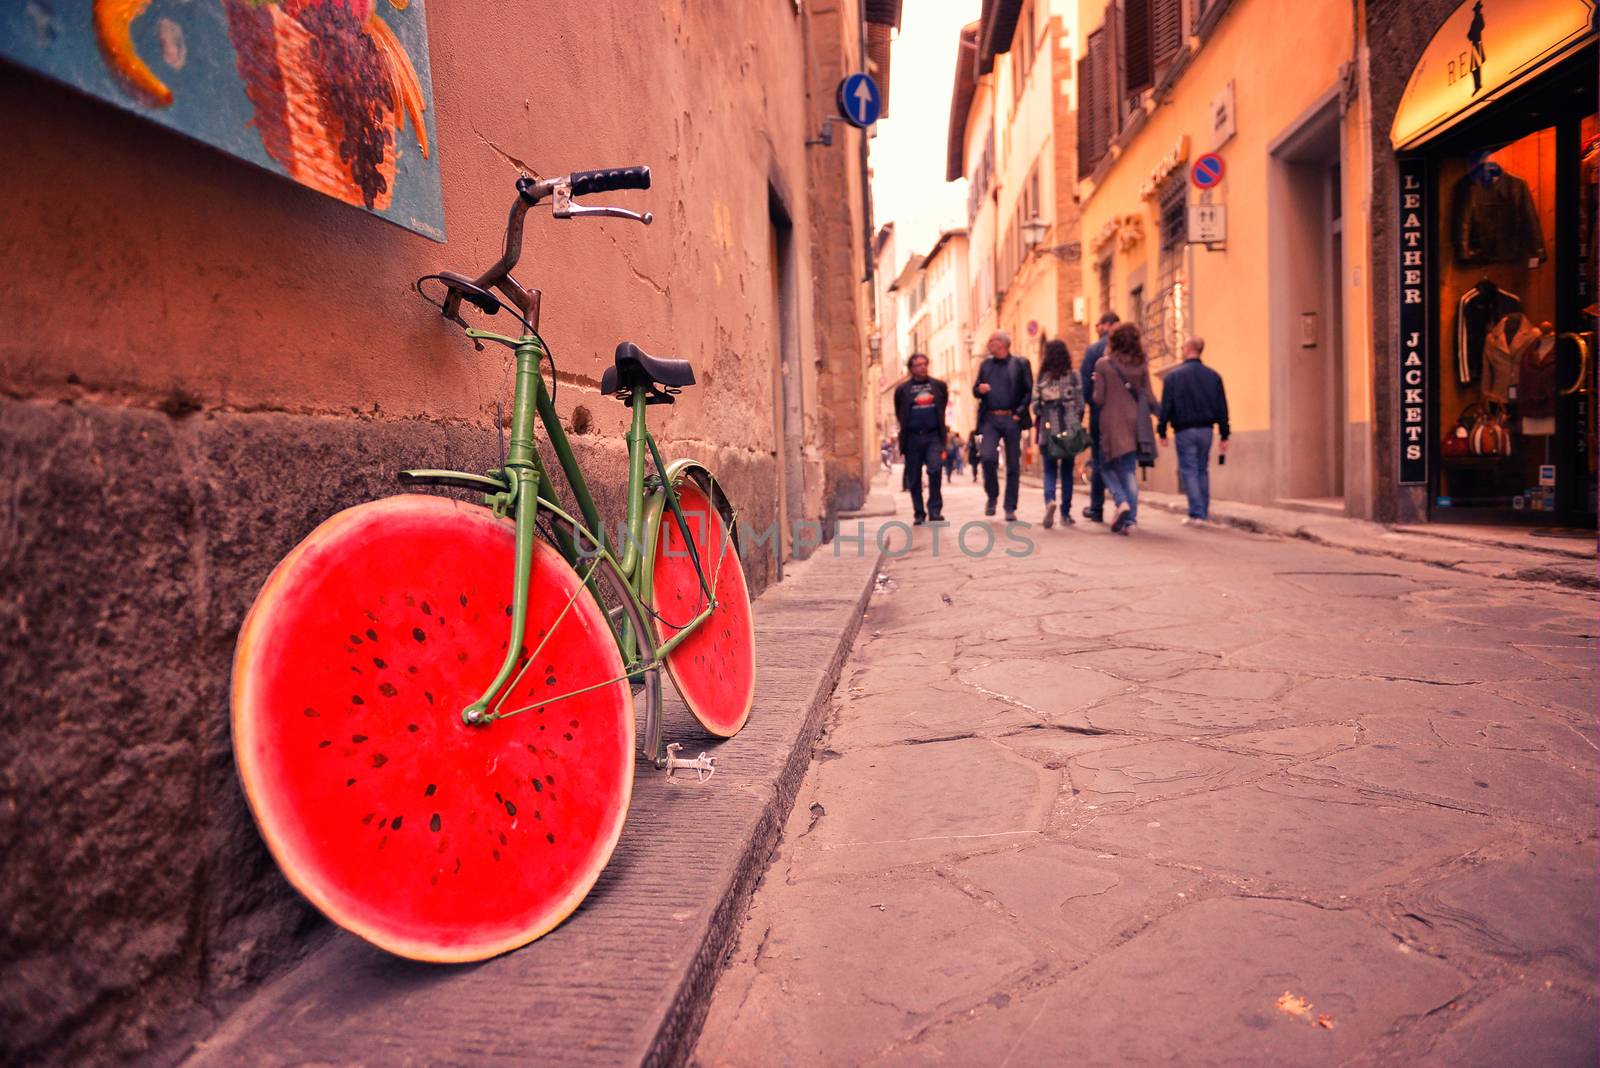 Old bicycle with watermelon wheels near the wall of the building by marynkin